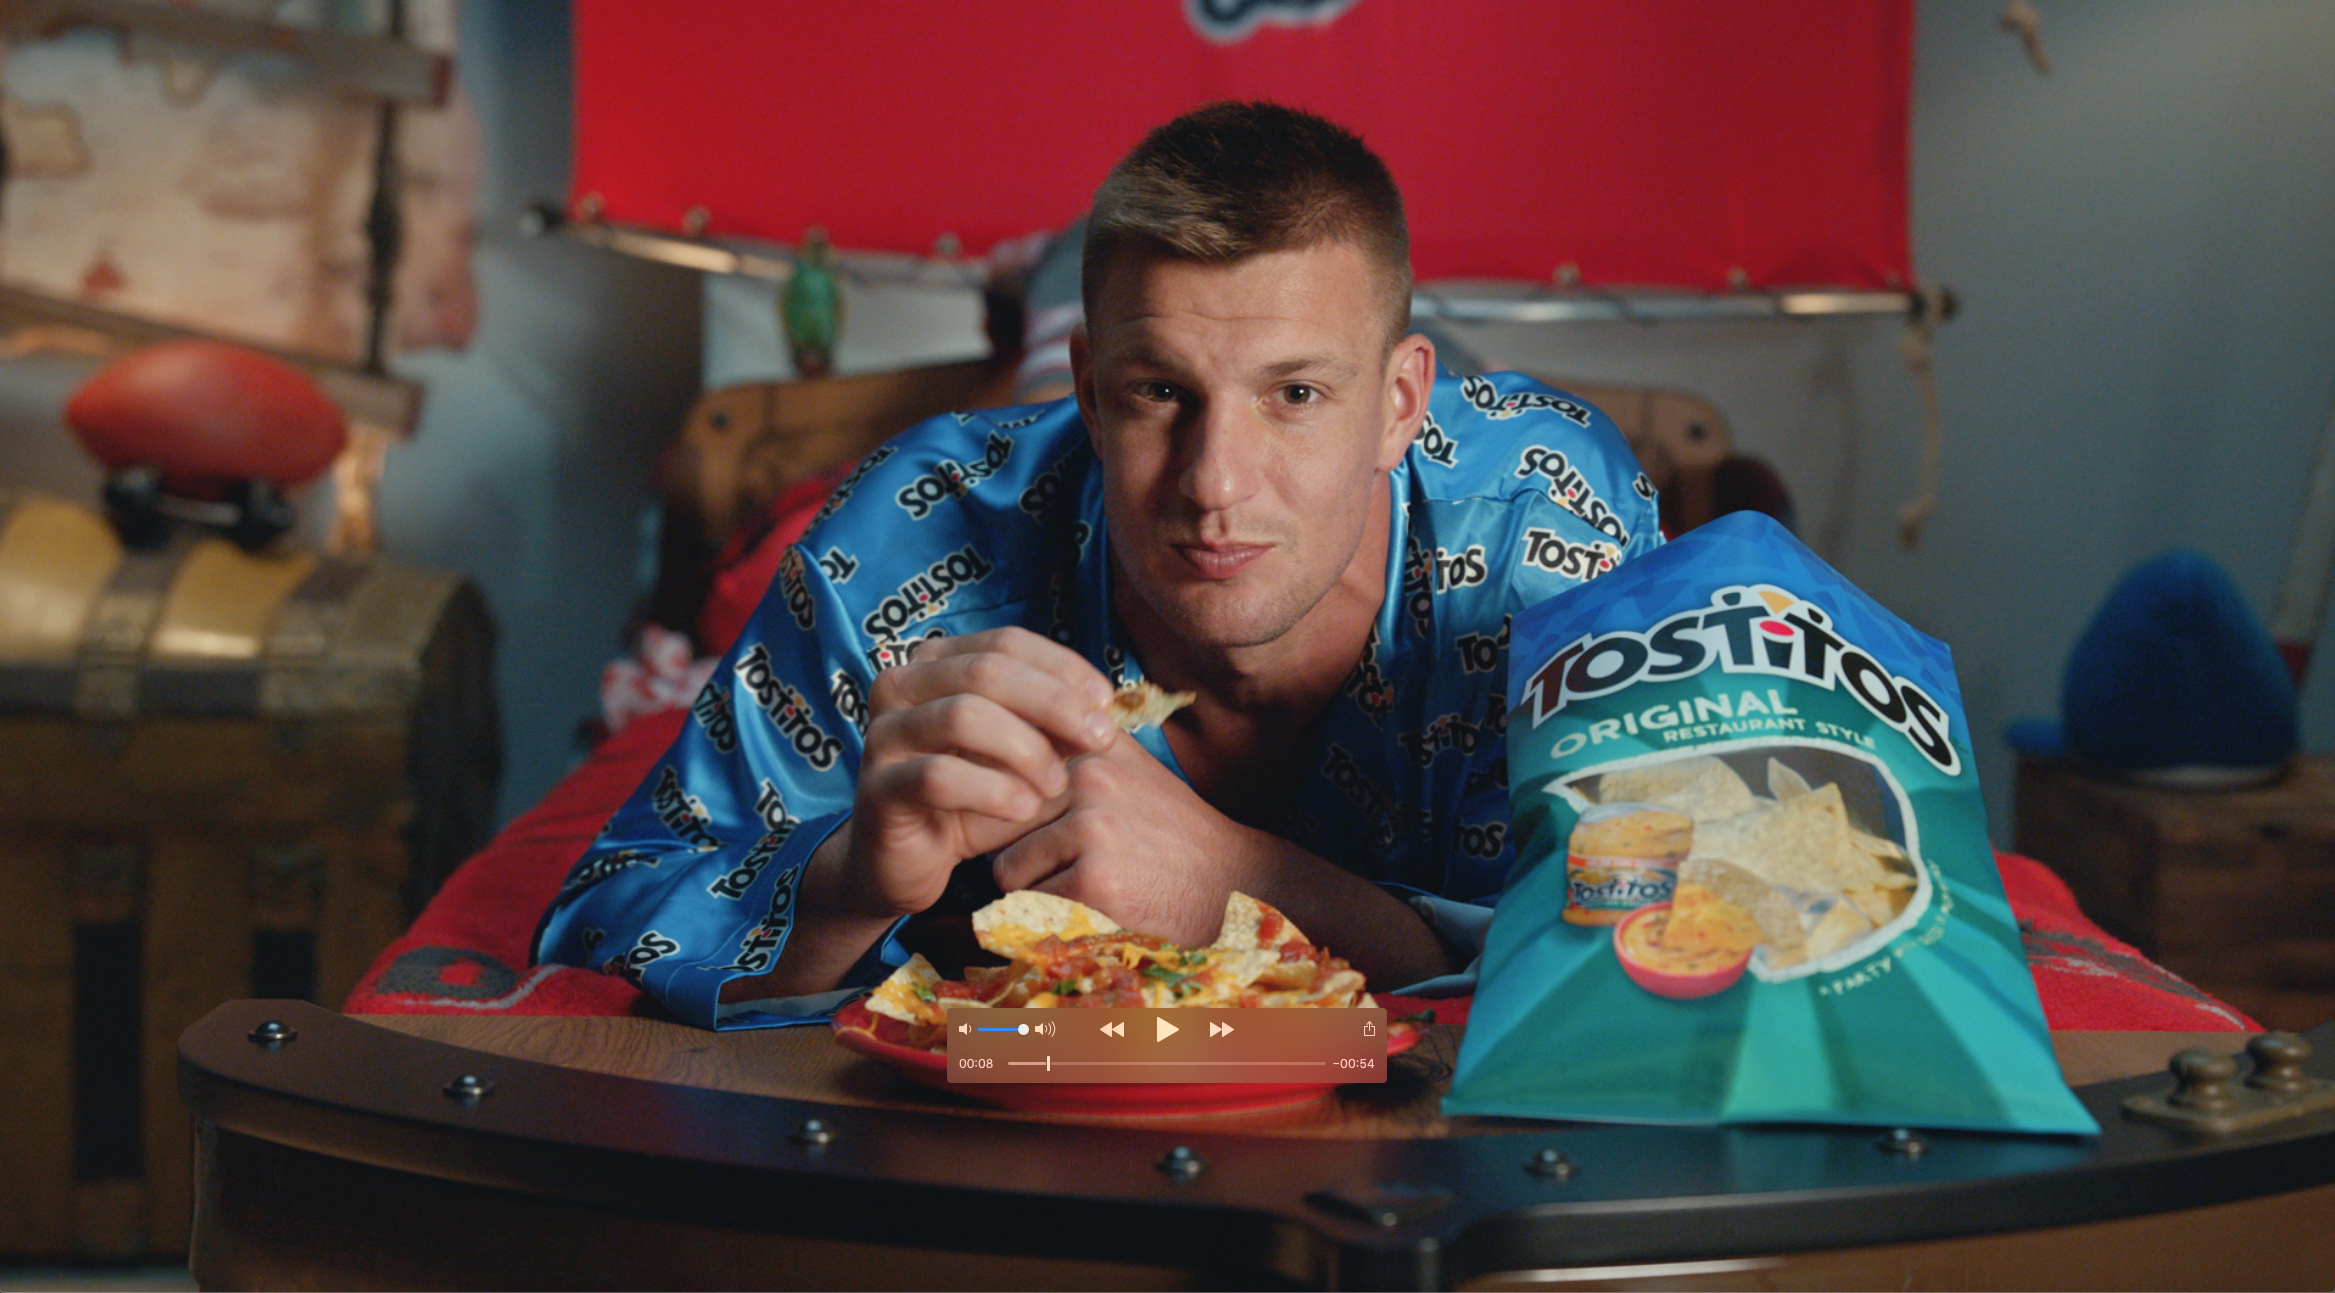 Frito-Lay's new commercial features NFL pros and legends, including Tom Brady and Rob Gronkowski ? both starring in their first commercial in a Tampa Bay uniform